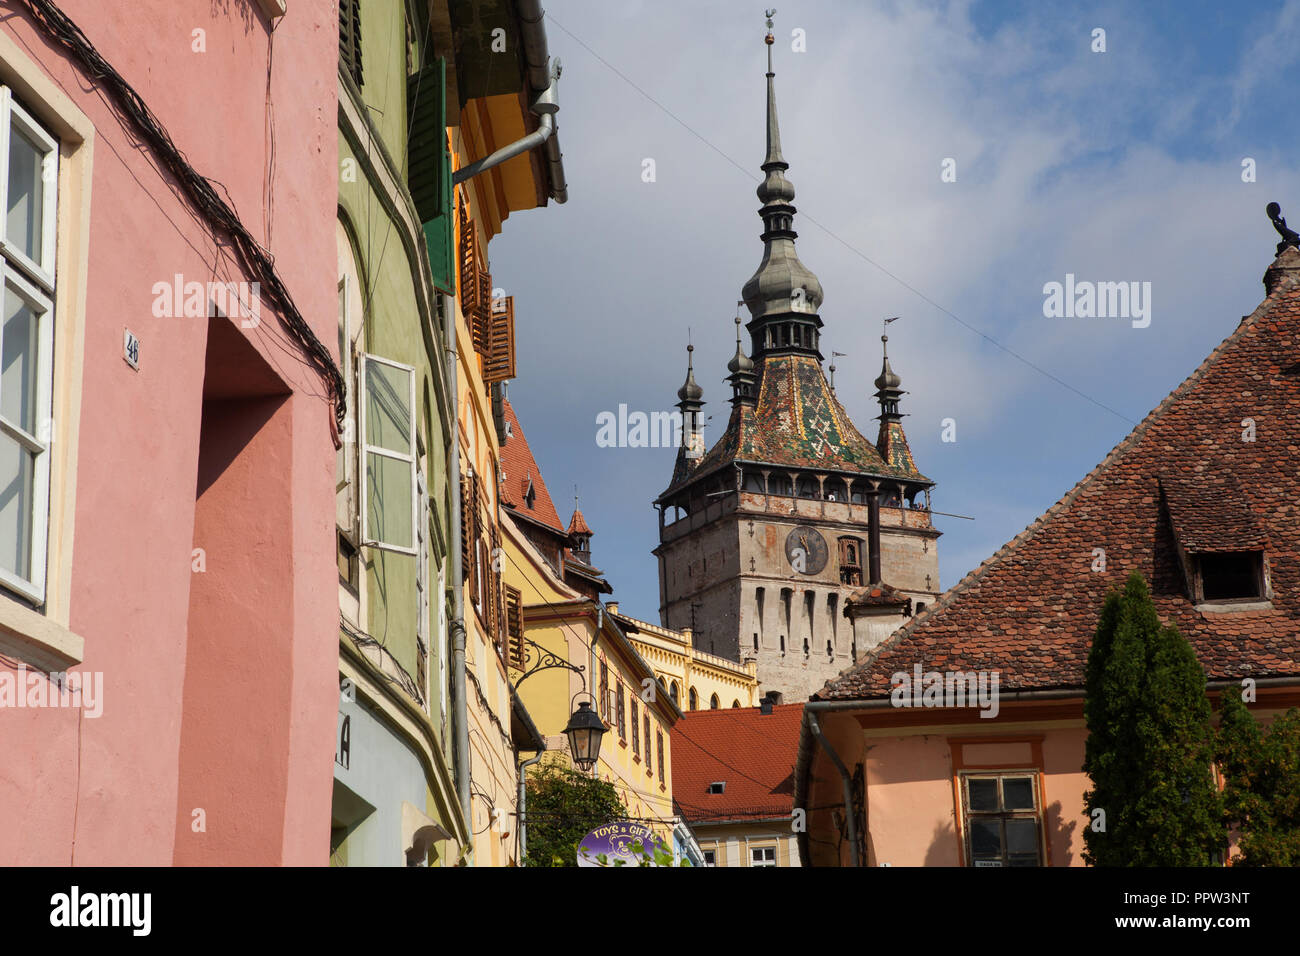 The Clock Tower in the old town of Sighsoara, Romania Stock Photo